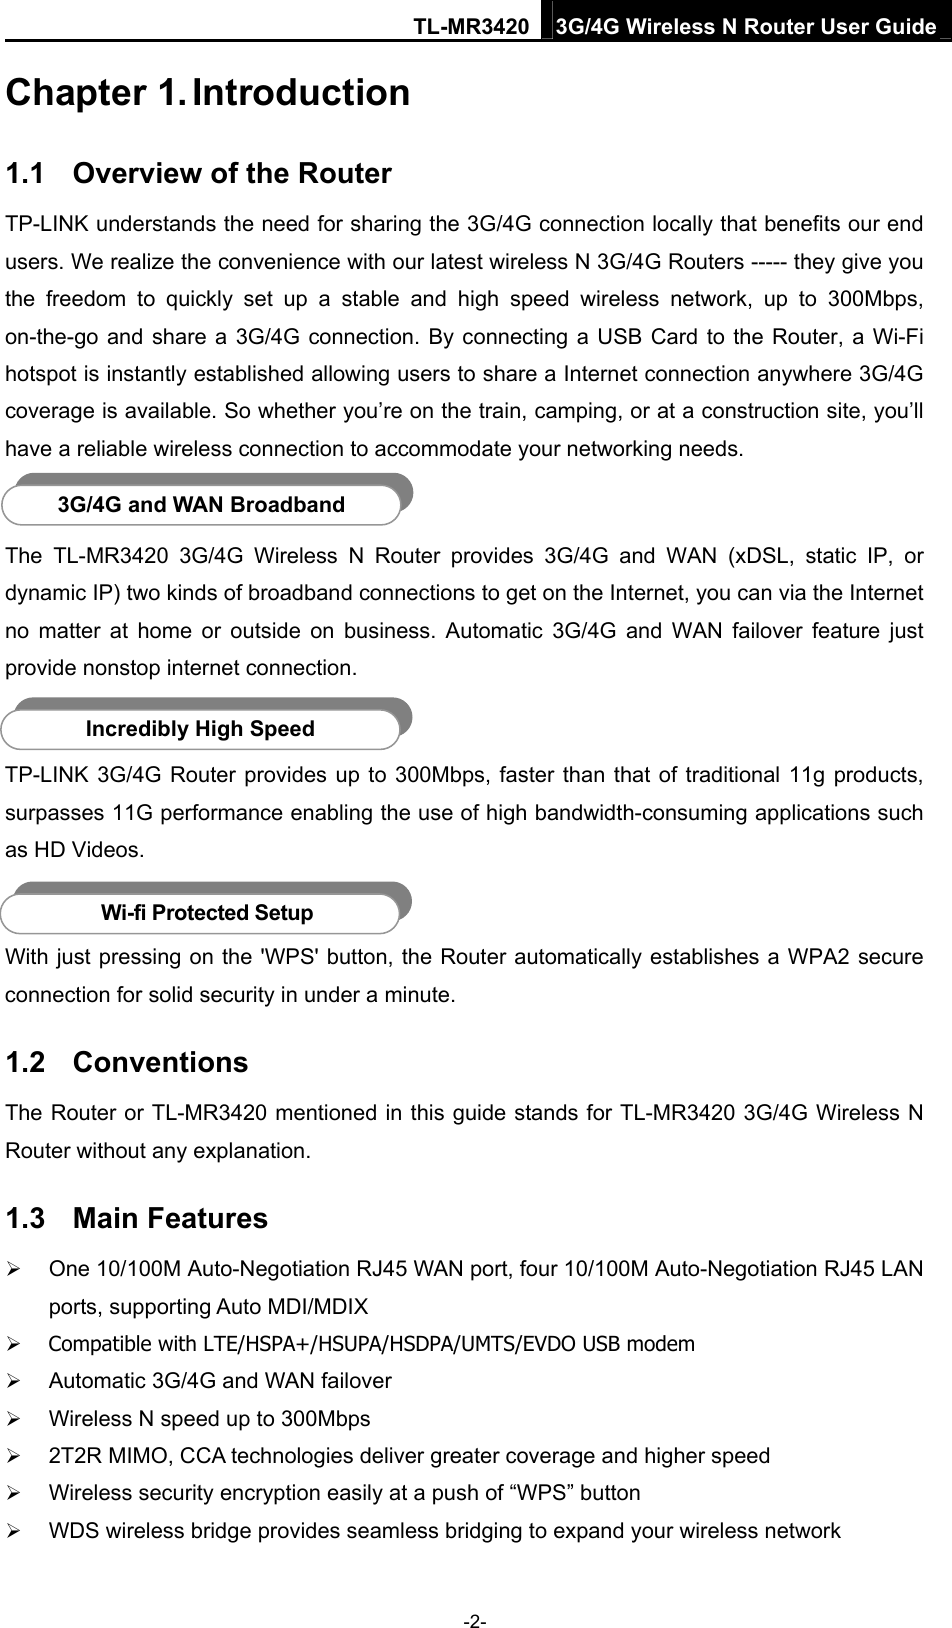 TL-MR3420 3G/4G Wireless N Router User Guide Chapter 1. Introduction 1.1  Overview of the Router TP-LINK understands the need for sharing the 3G/4G connection locally that benefits our end users. We realize the convenience with our latest wireless N 3G/4G Routers ----- they give you the freedom to quickly set up a stable and high speed wireless network, up to 300Mbps, on-the-go and share a 3G/4G connection. By connecting a USB Card to the Router, a Wi-Fi hotspot is instantly established allowing users to share a Internet connection anywhere 3G/4G coverage is available. So whether you’re on the train, camping, or at a construction site, you’ll have a reliable wireless connection to accommodate your networking needs.  3G/4G and WAN Broadband The TL-MR3420 3G/4G Wireless N Router provides 3G/4G and WAN (xDSL, static IP, or dynamic IP) two kinds of broadband connections to get on the Internet, you can via the Internet no matter at home or outside on business. Automatic 3G/4G and WAN failover feature just provide nonstop internet connection.    Incredibly High Speed TP-LINK 3G/4G Router provides up to 300Mbps, faster than that of traditional 11g products, surpasses 11G performance enabling the use of high bandwidth-consuming applications such as HD Videos.    Wi-fi Protected Setup With just pressing on the &apos;WPS&apos; button, the Router automatically establishes a WPA2 secure connection for solid security in under a minute.   1.2  Conventions The Router or TL-MR3420 mentioned in this guide stands for TL-MR3420 3G/4G Wireless N Router without any explanation. 1.3  Main Features  One 10/100M Auto-Negotiation RJ45 WAN port, four 10/100M Auto-Negotiation RJ45 LAN ports, supporting Auto MDI/MDIX  Compatible with LTE/HSPA+/HSUPA/HSDPA/UMTS/EVDO USB modem  Automatic 3G/4G and WAN failover  Wireless N speed up to 300Mbps  2T2R MIMO, CCA technologies deliver greater coverage and higher speed  Wireless security encryption easily at a push of “WPS” button  WDS wireless bridge provides seamless bridging to expand your wireless network -2- 